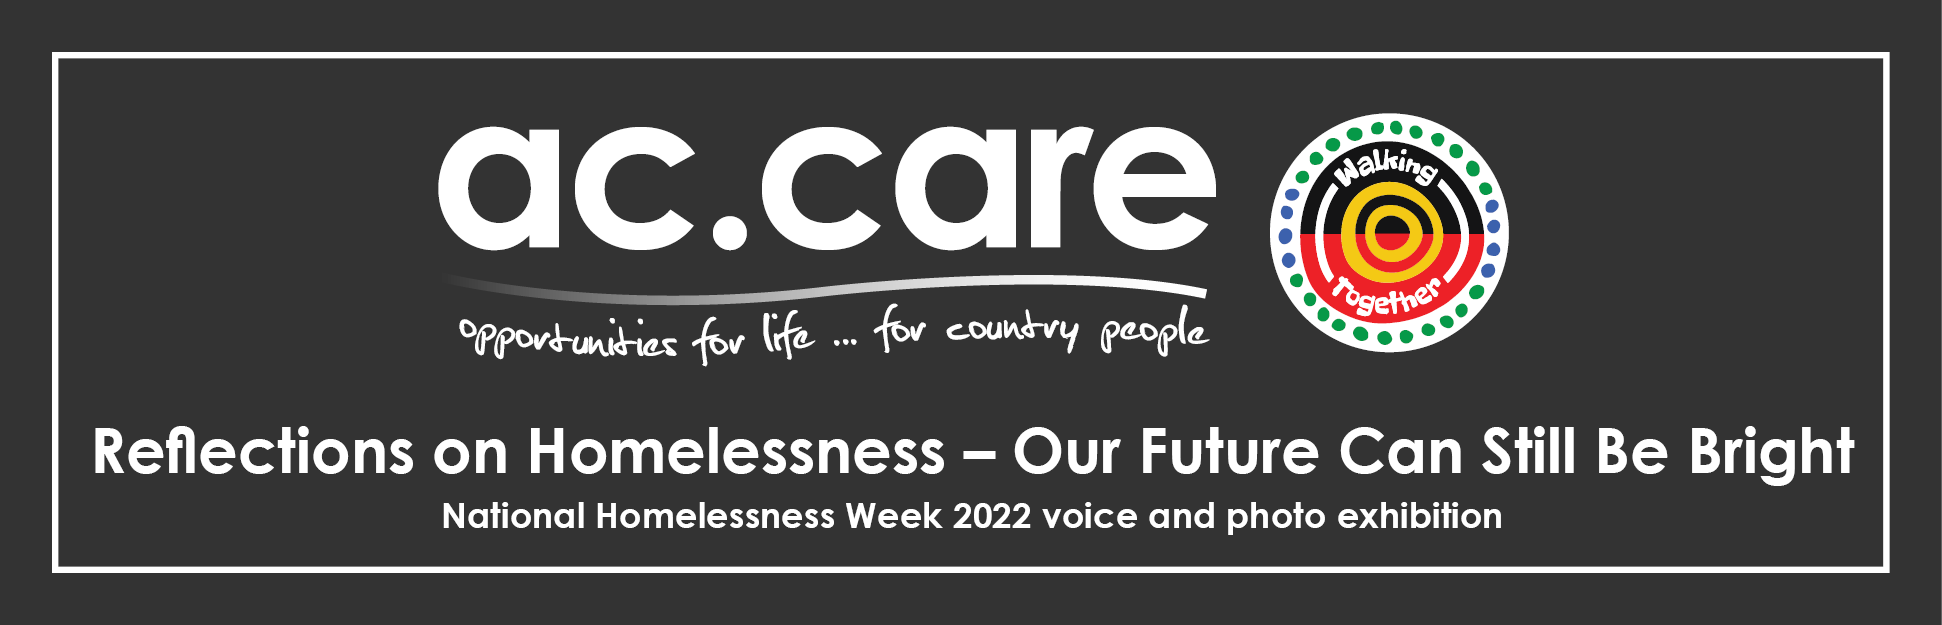 Homelessness Photo and Voice exhibition